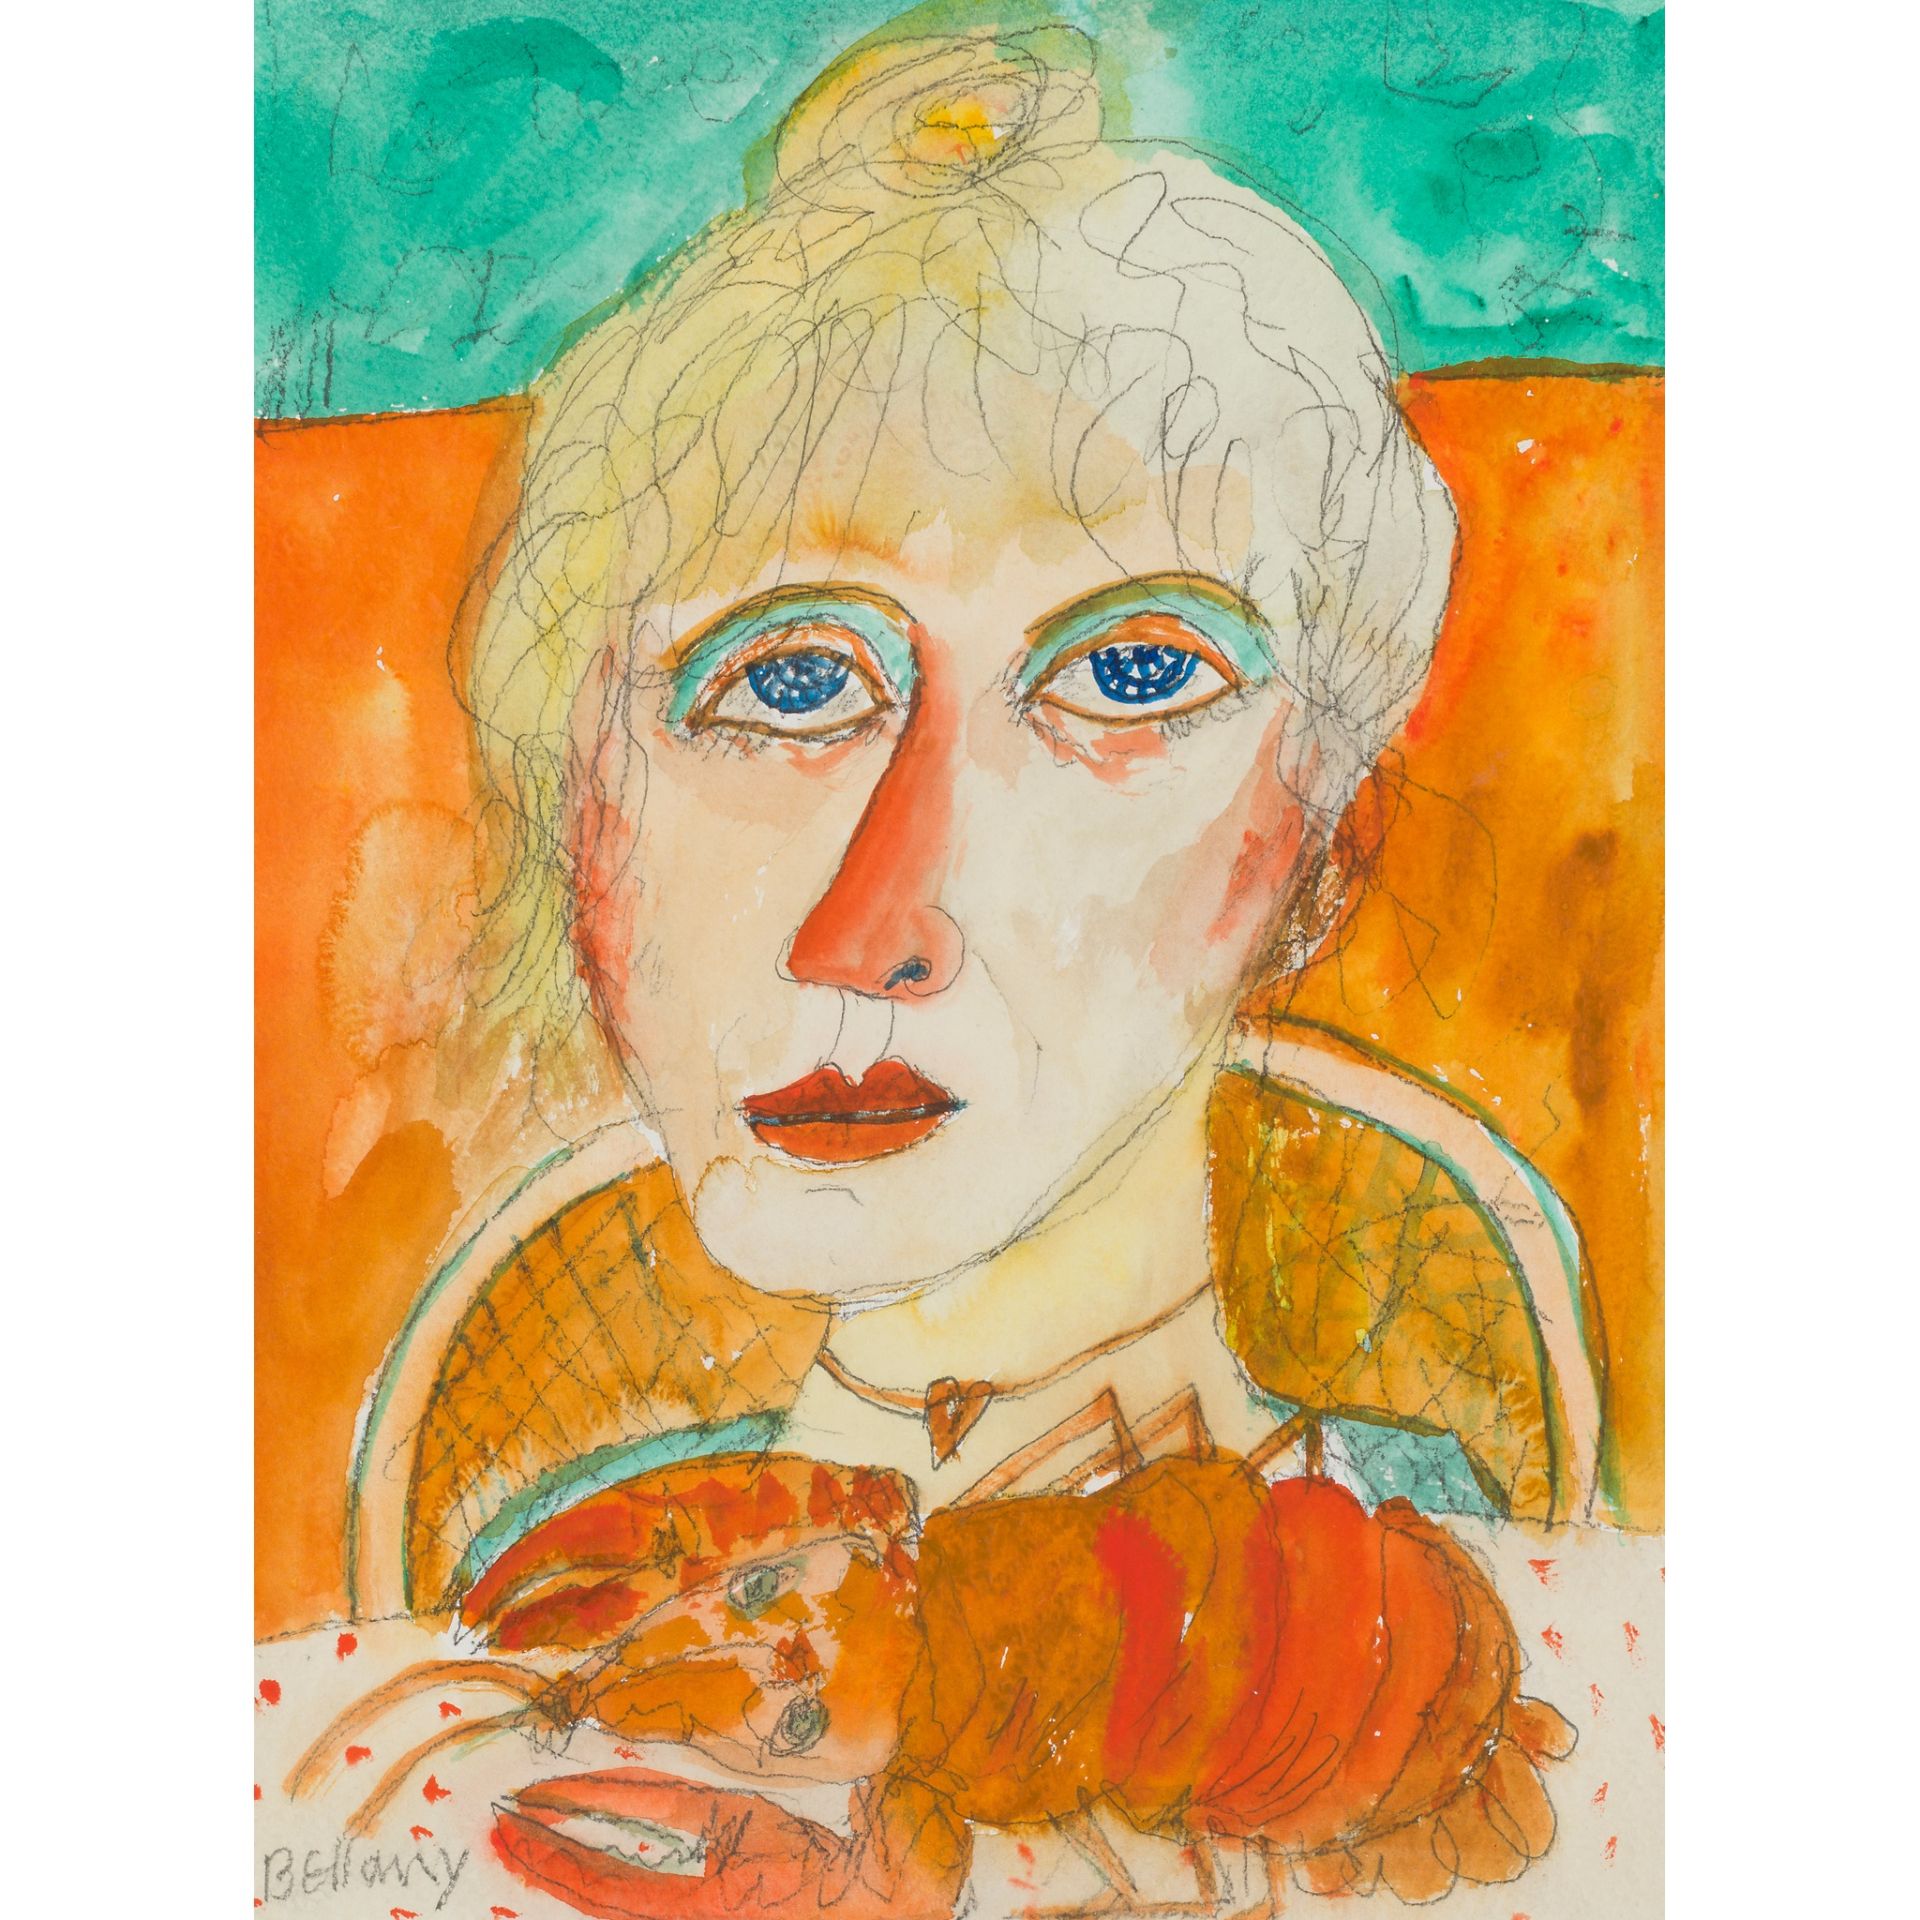 § JOHN BELLANY C.B.E., R.A. (SCOTTISH 1942-2013) WOMAN WITH LOBSTER